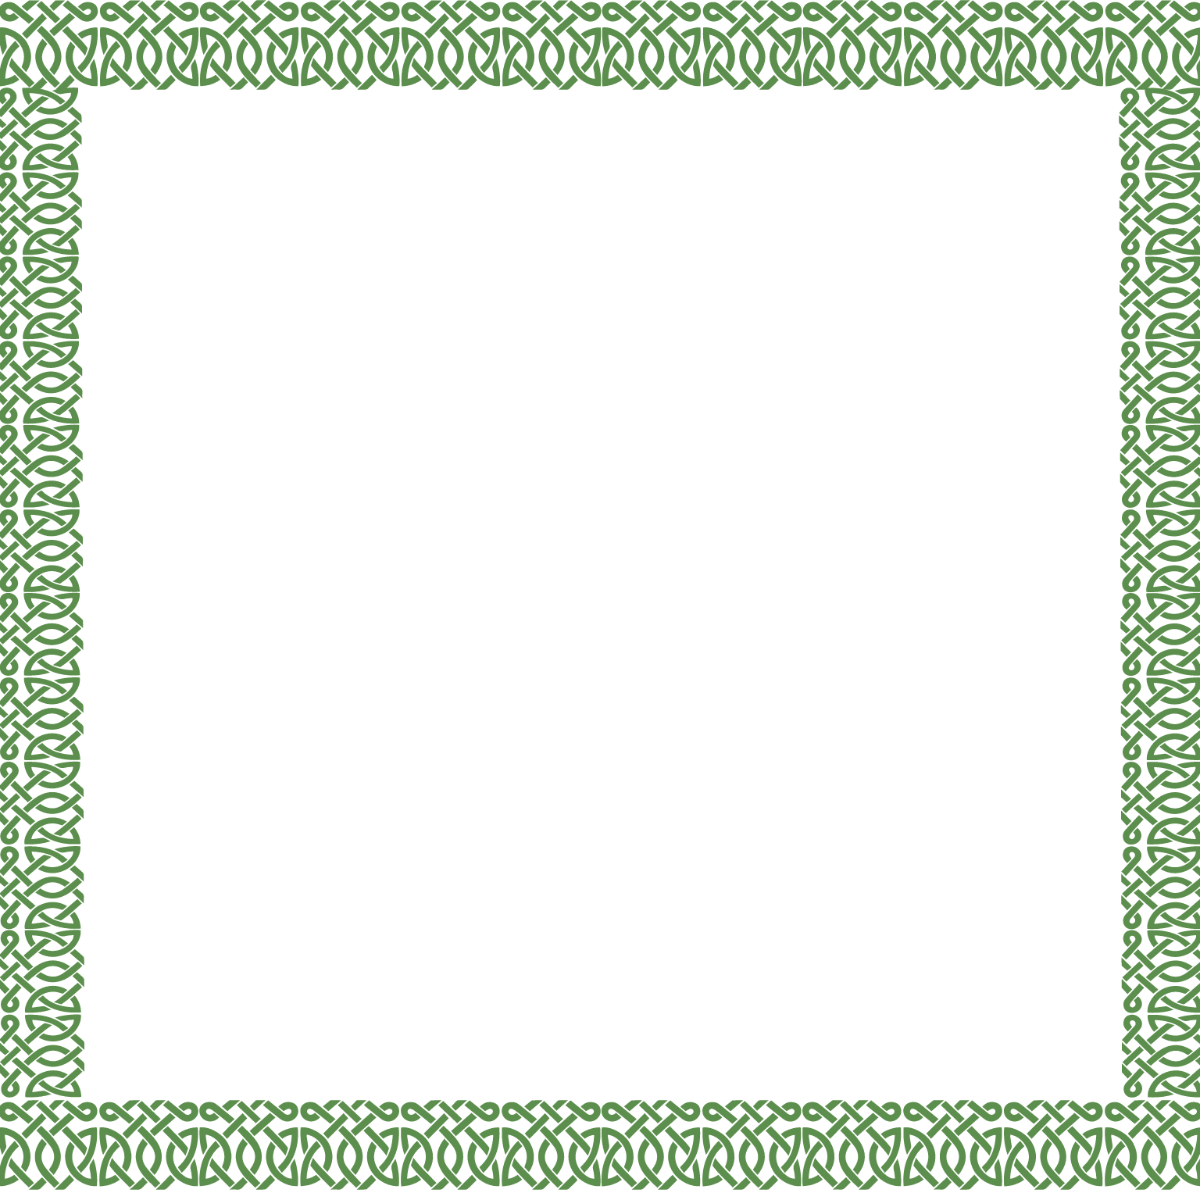 Free Celtic Frame Clipart Template